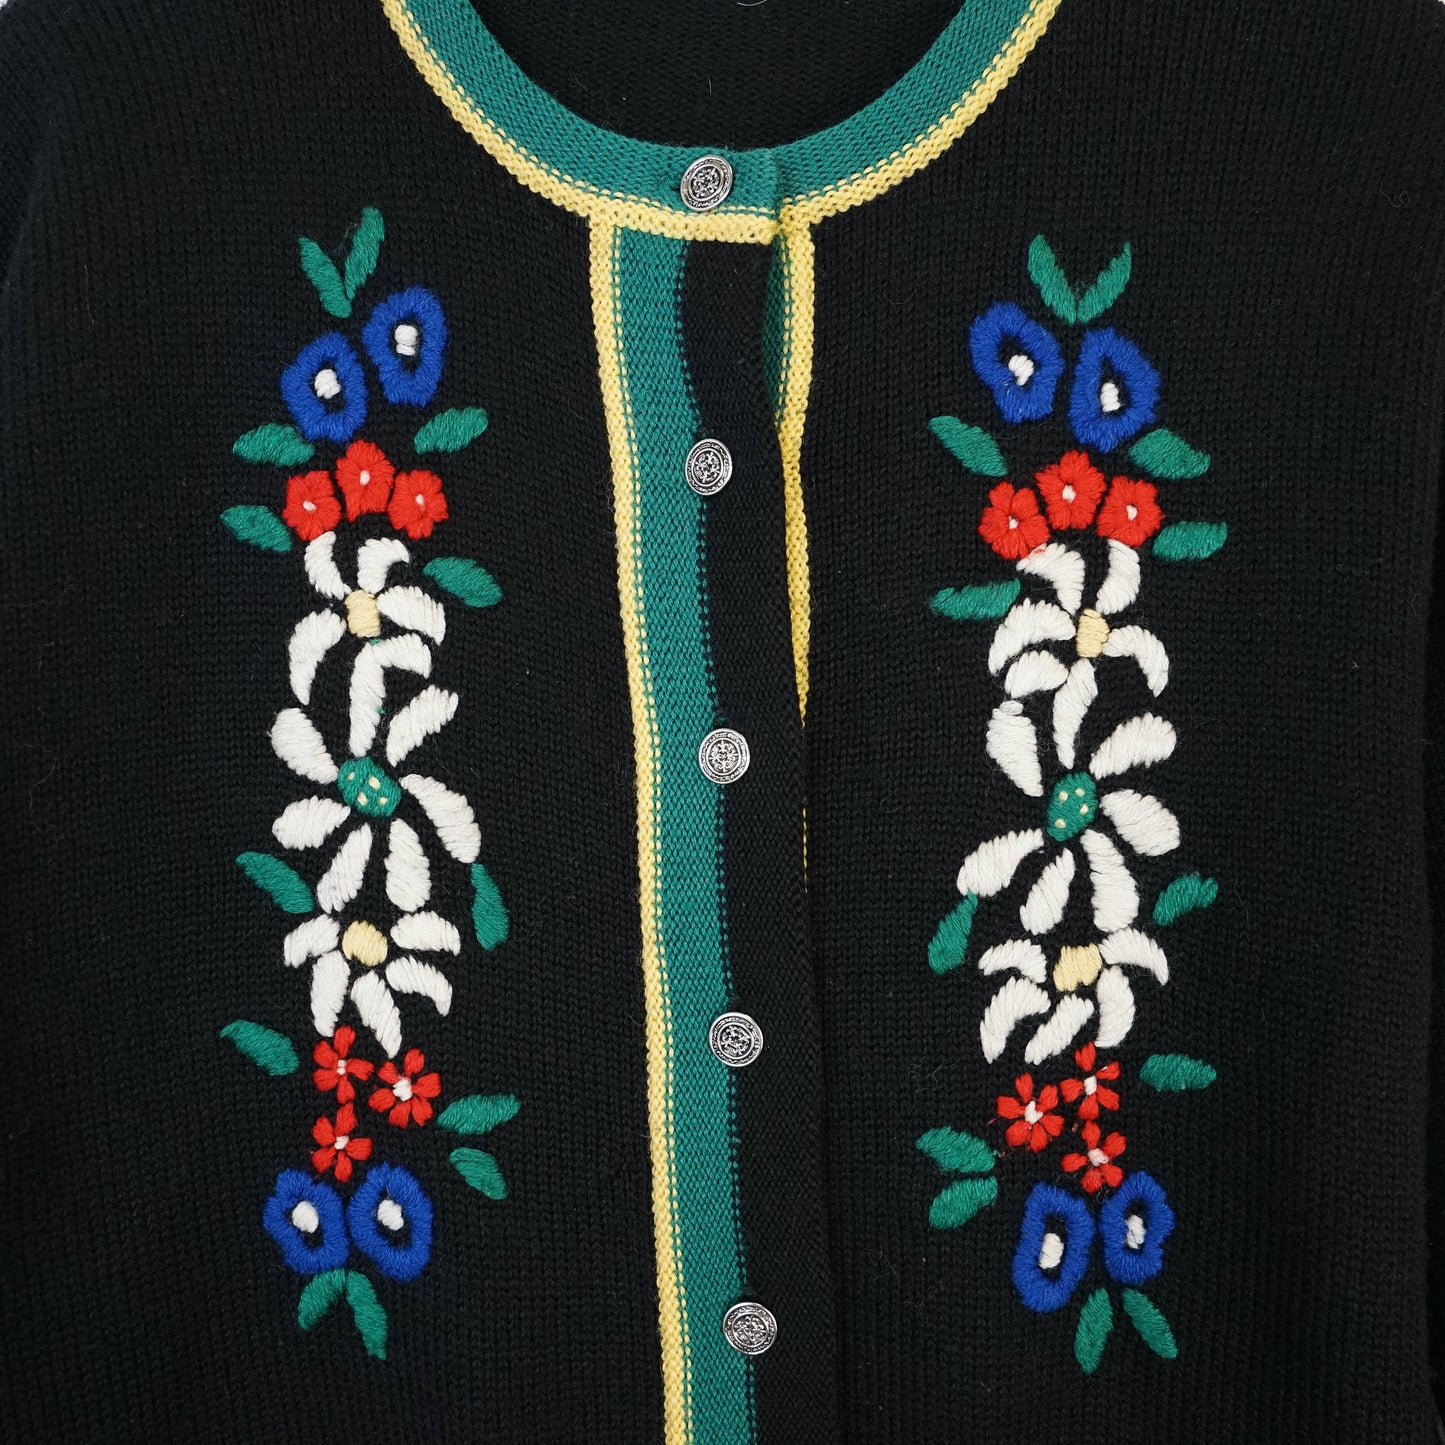 Vintage embroidery Cardigan size S